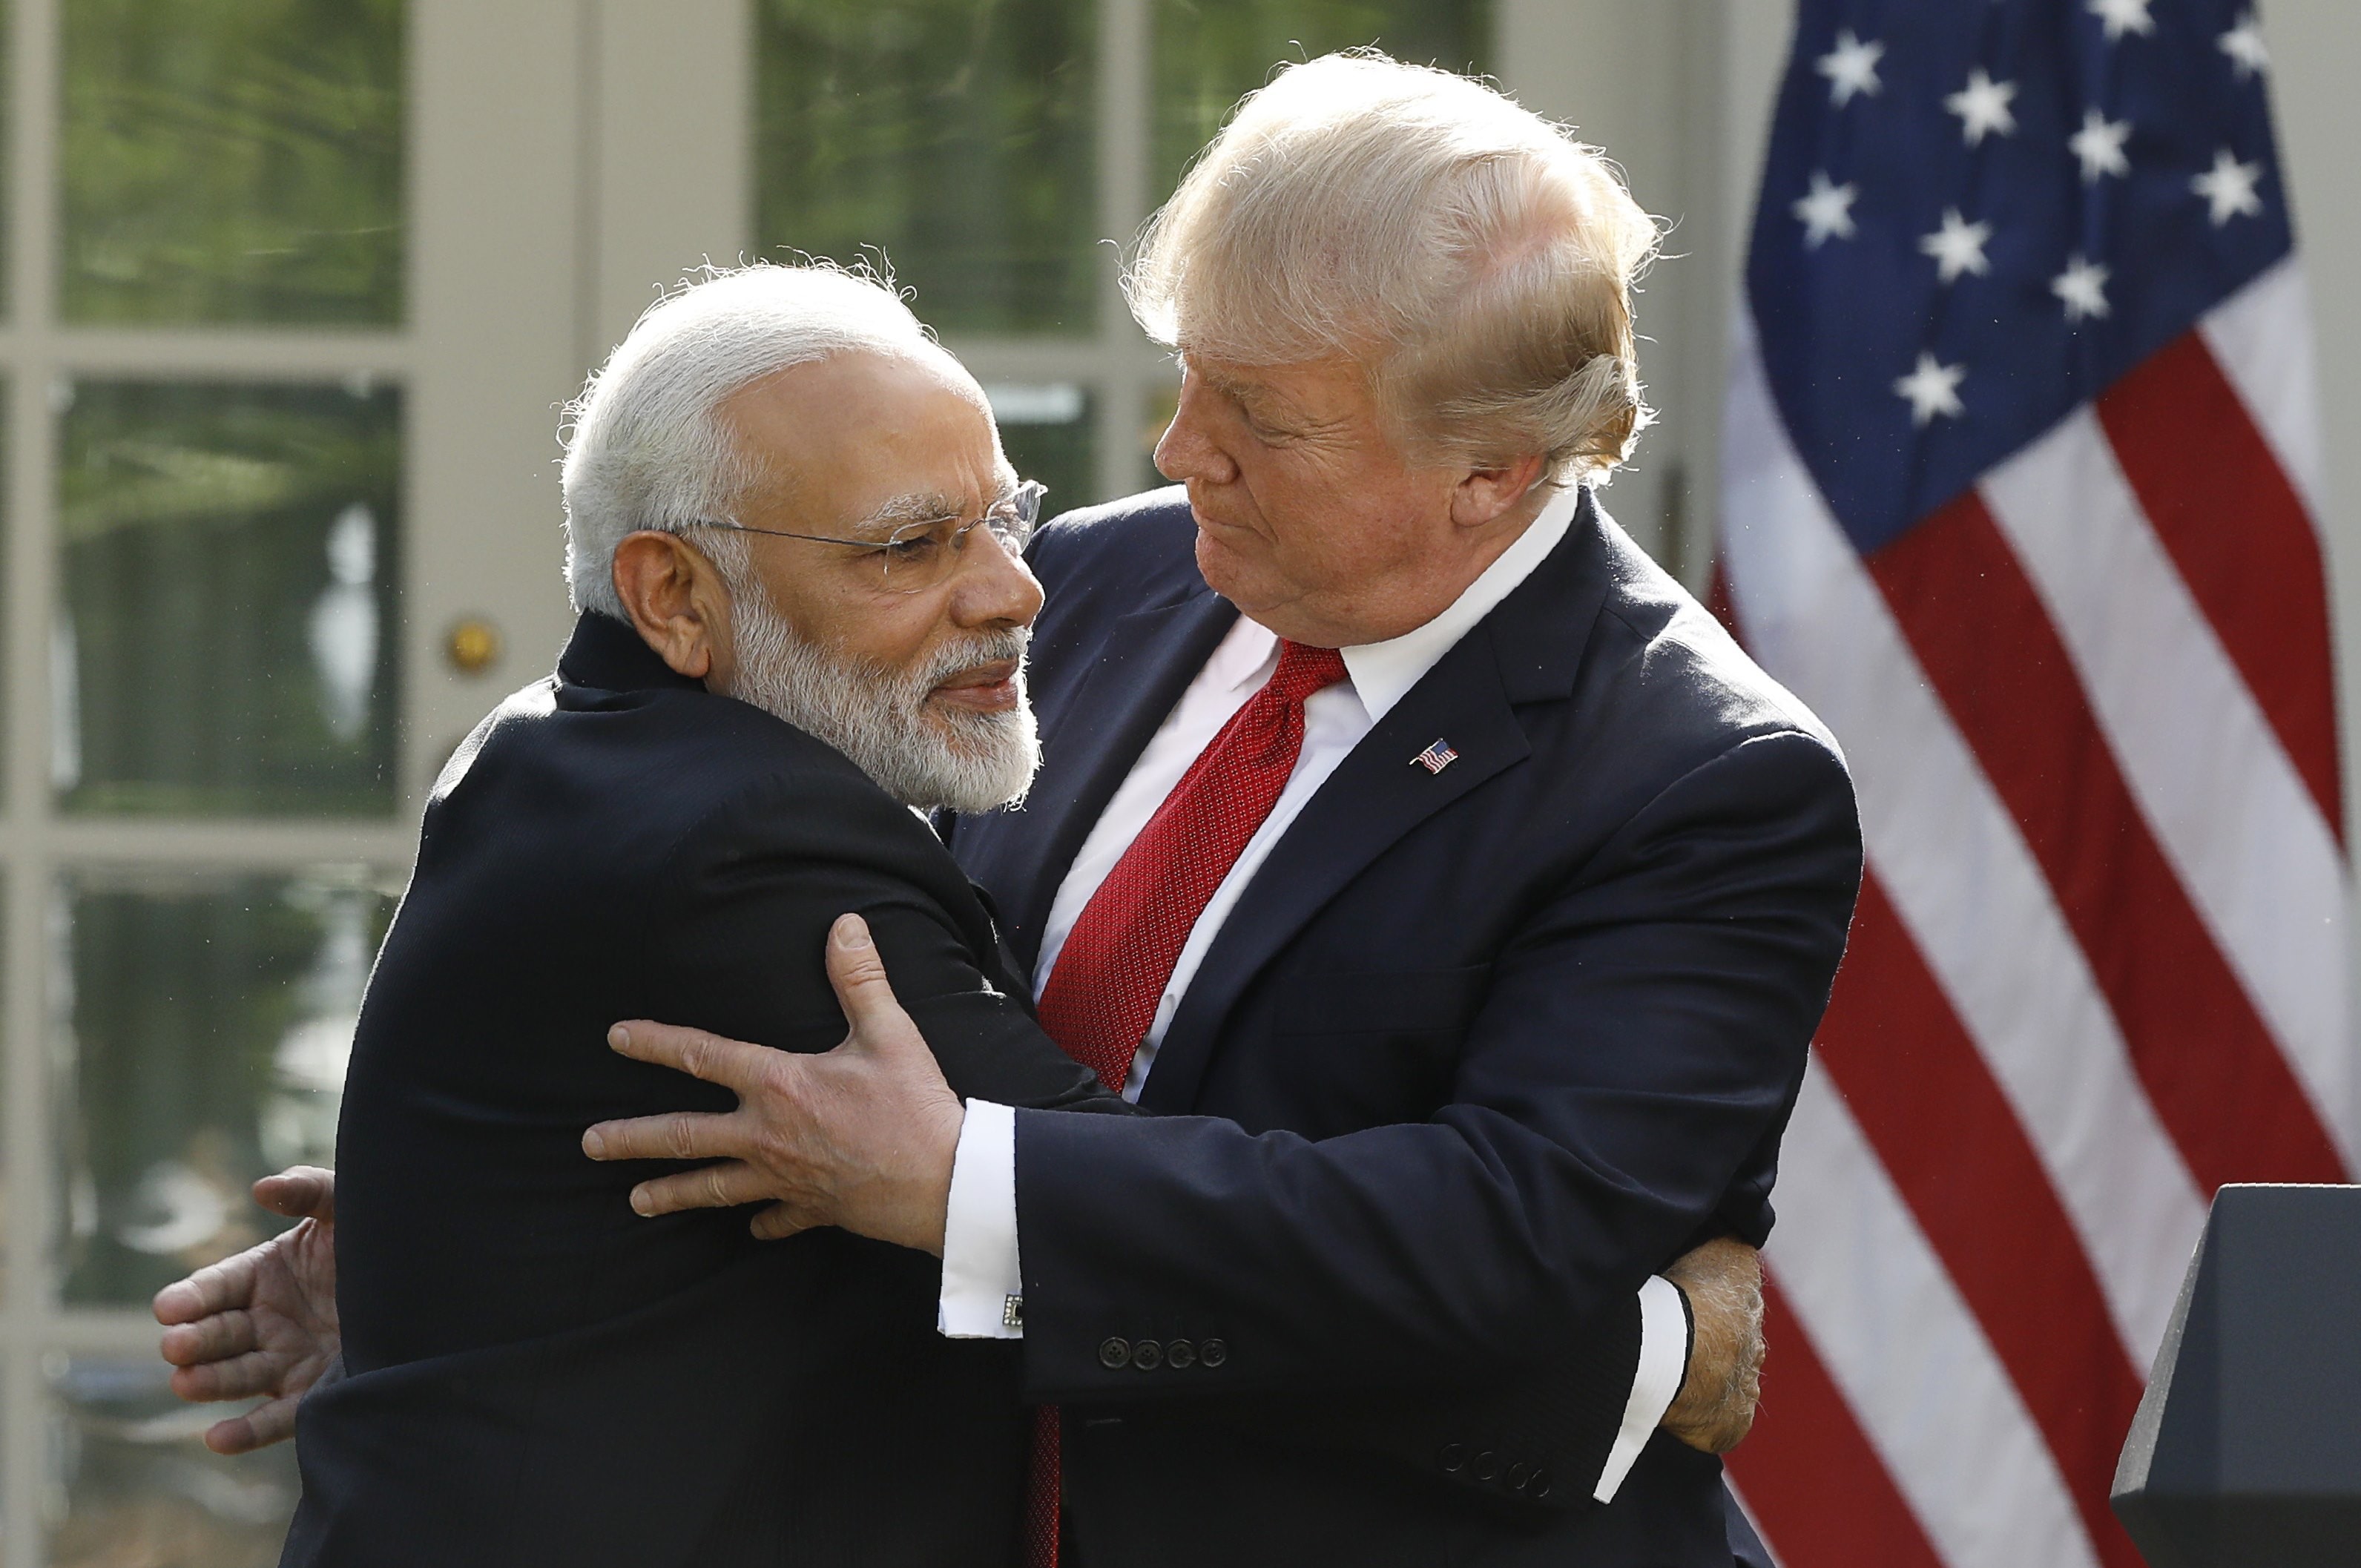 India’s Prime Minister Narendra Modi hugs US President Donald Trump in the Rose Garden of the White House in Washington in June 2017. As part of its Indo-Pacific strategy, the US has renamed its Pacific Naval Command the Indo-Pacific Command. Photo: Reuters